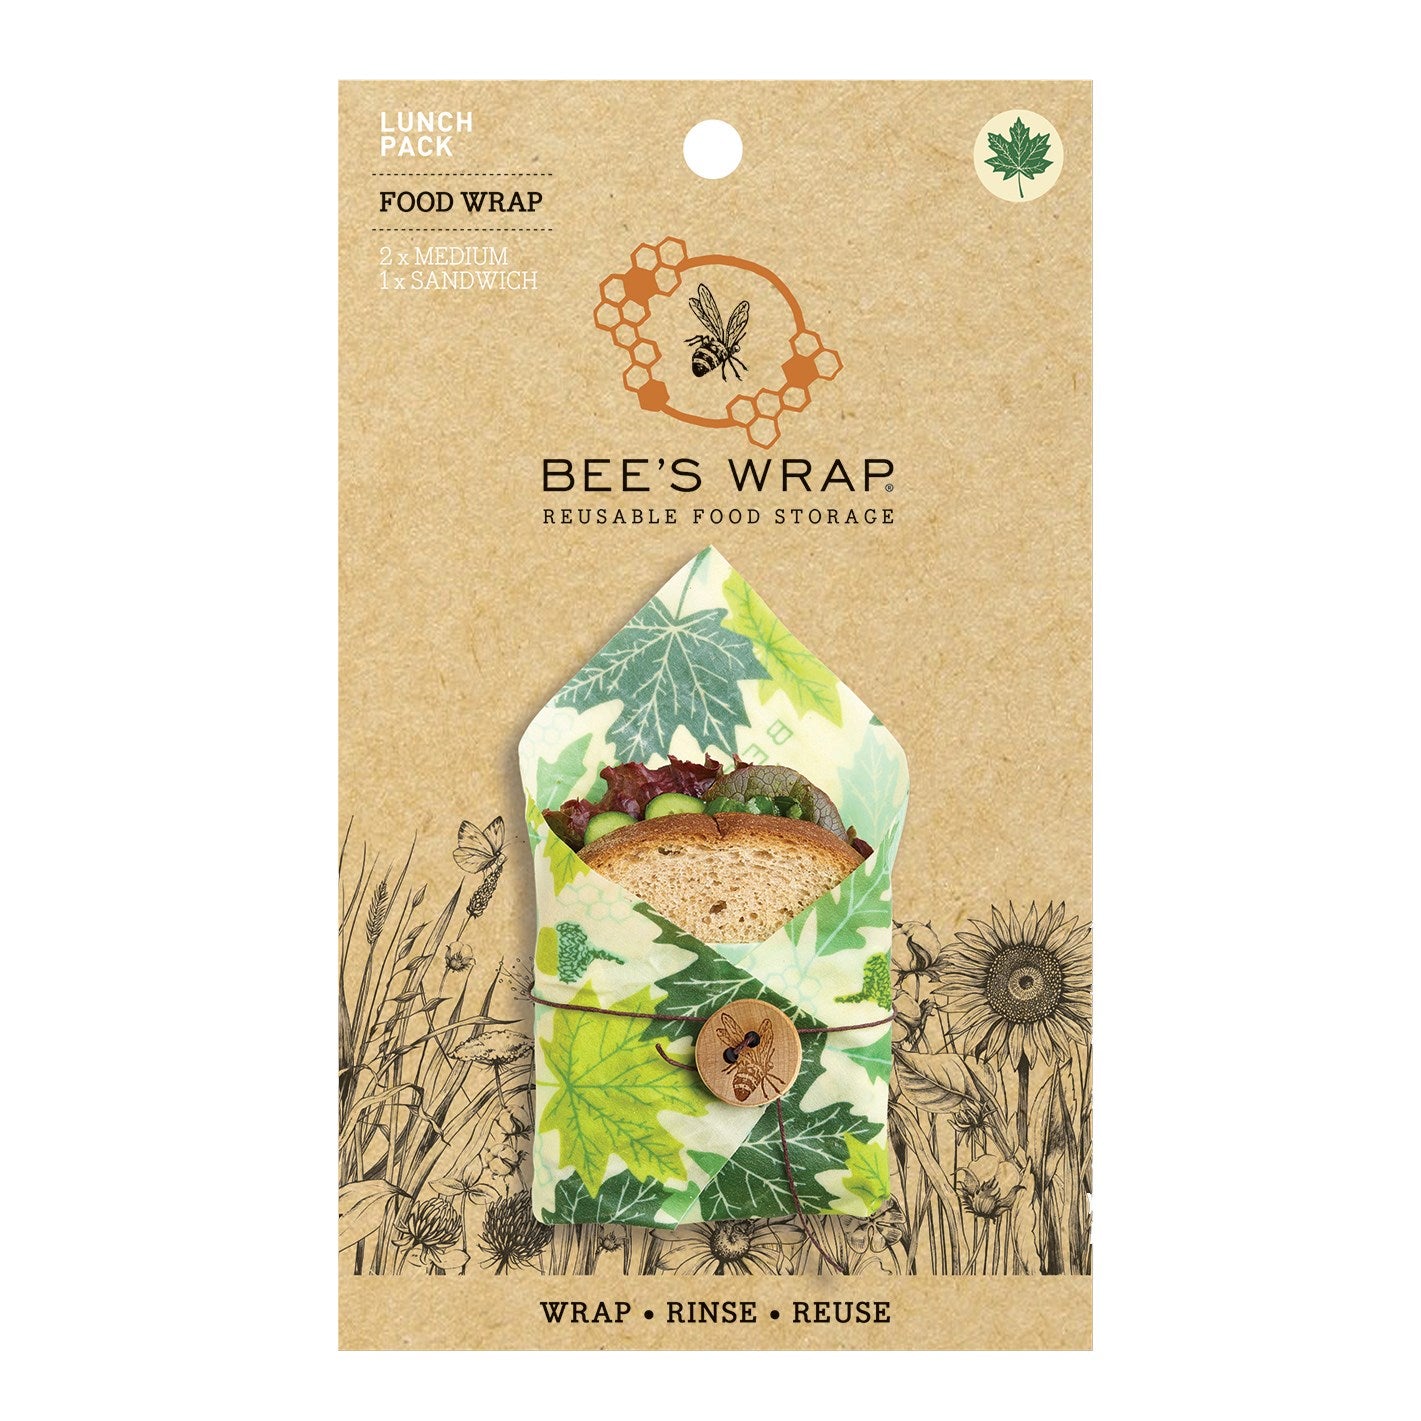 Set of 3 Bees Wrap Lunch Pack with leaf pattern and button closure